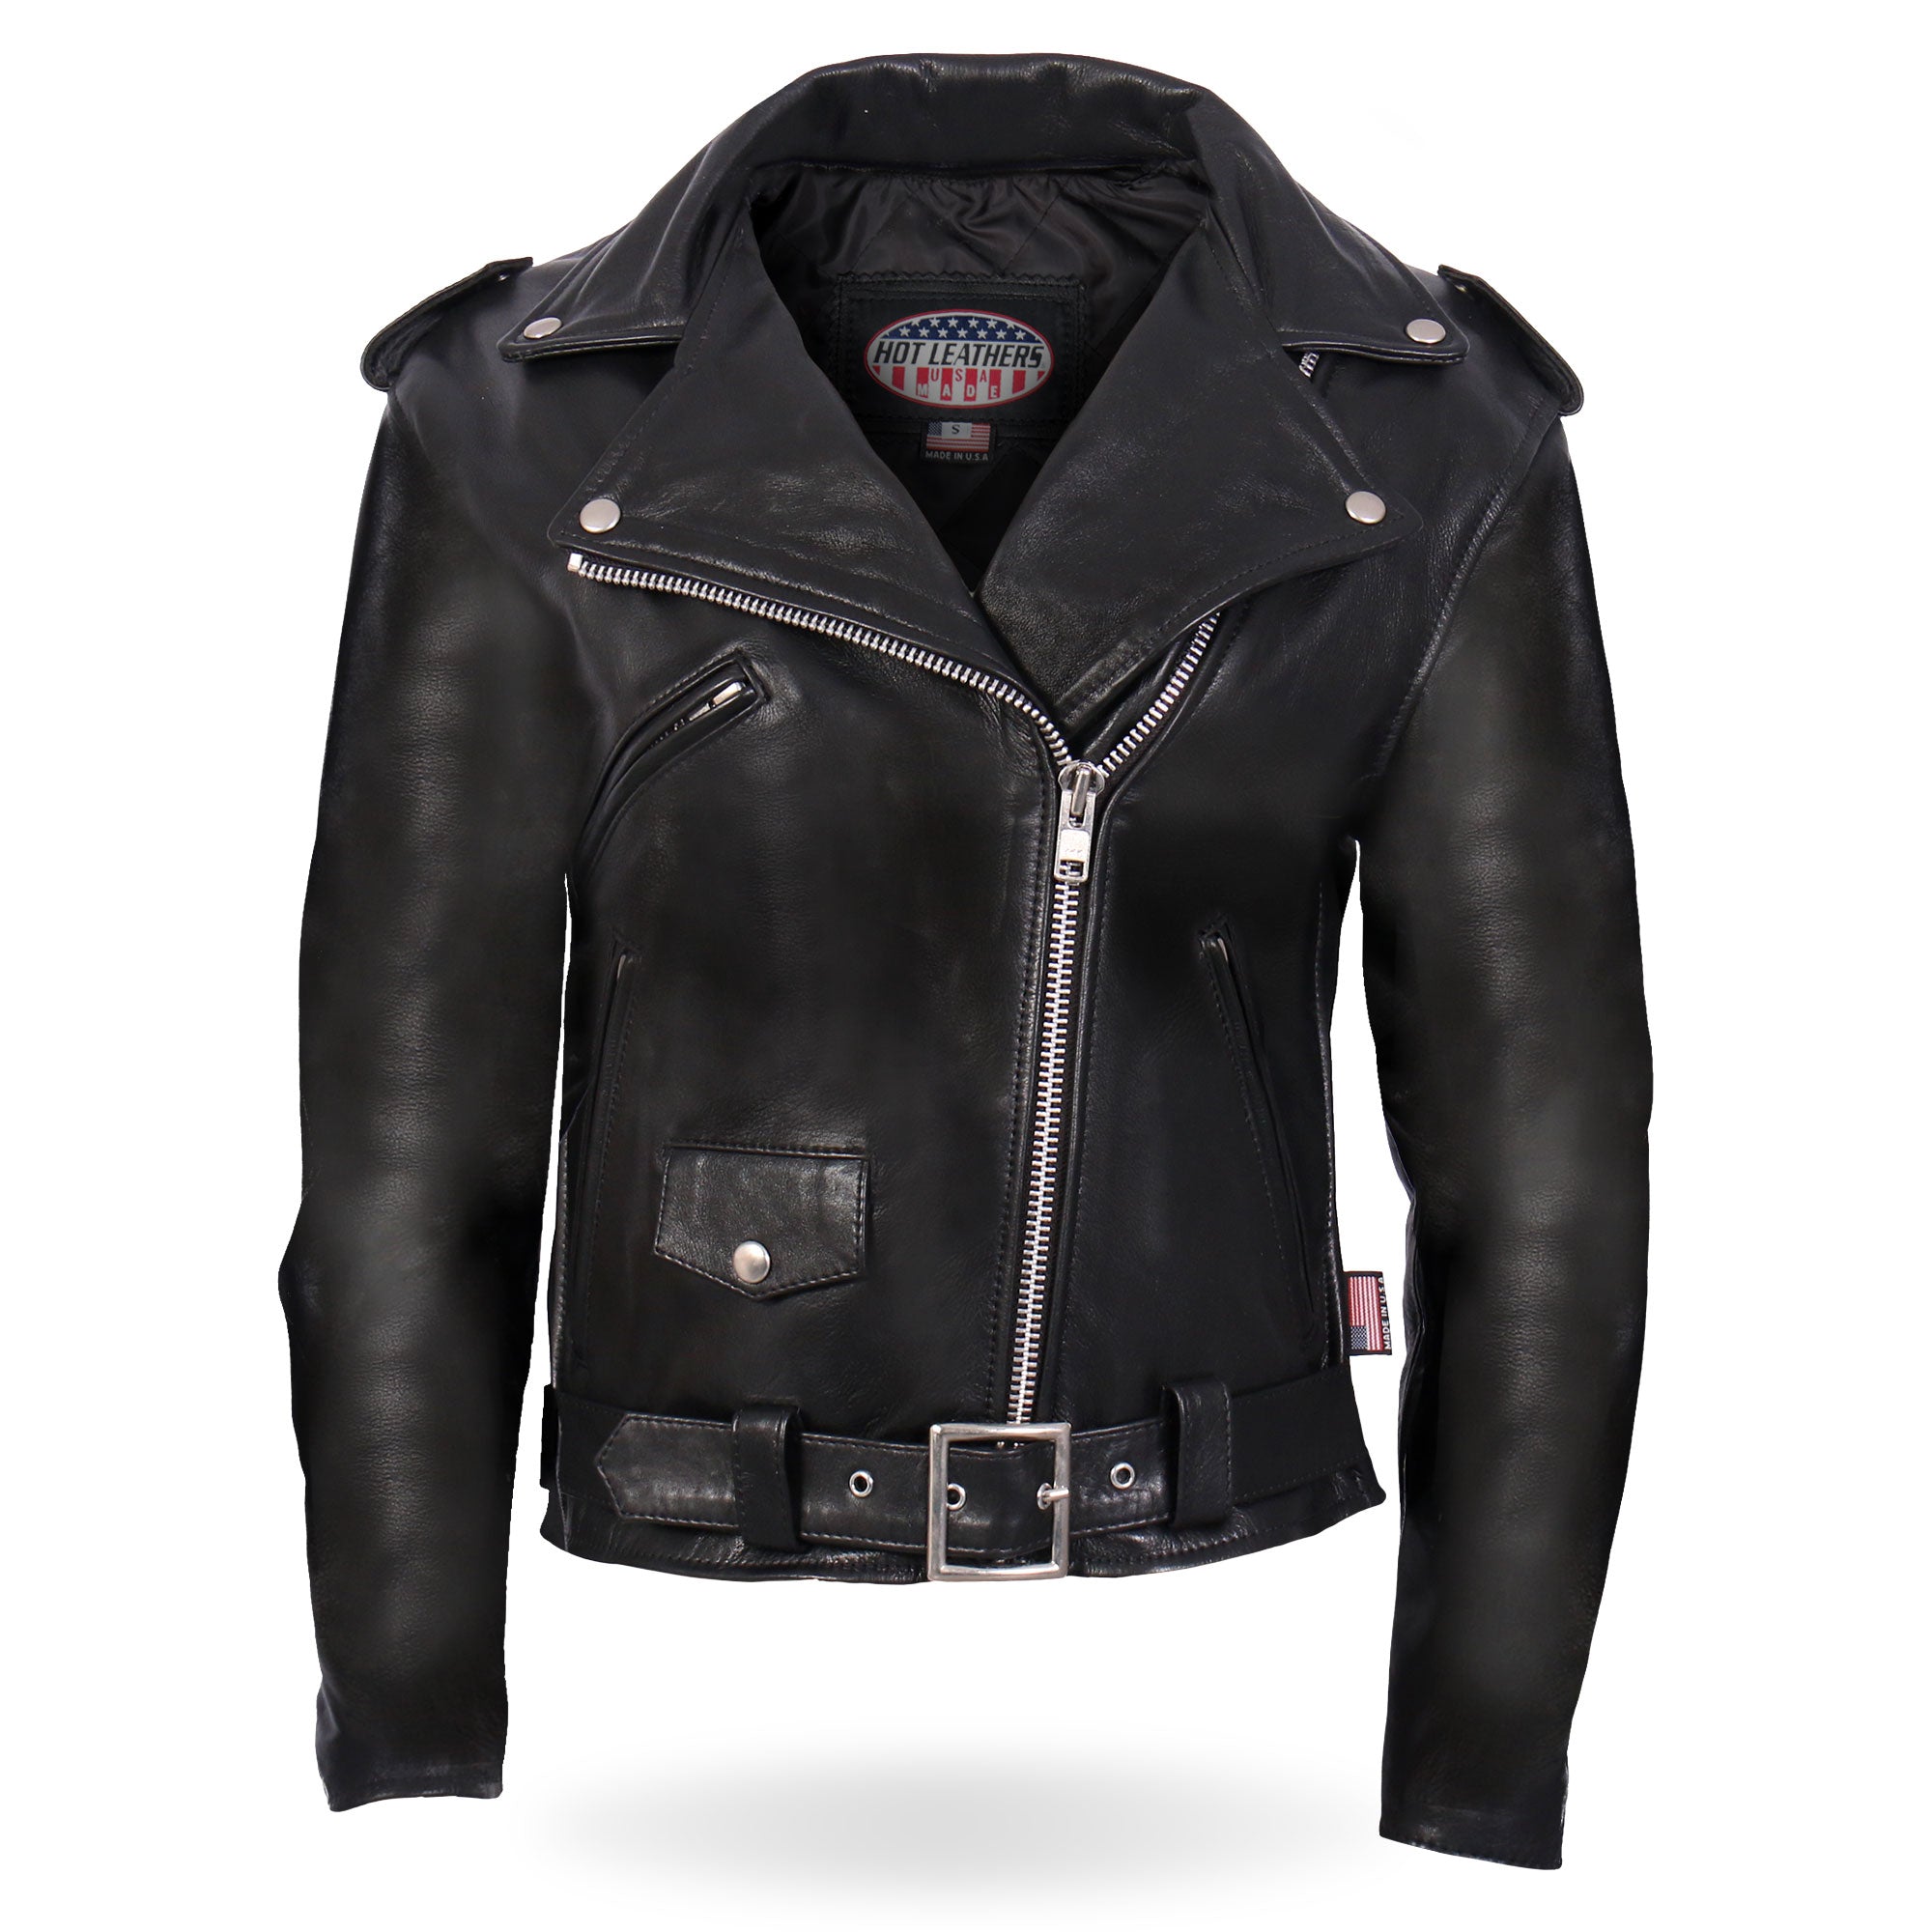 Leather jacket available online @jlk_fashion Price :R500 Sizes :S